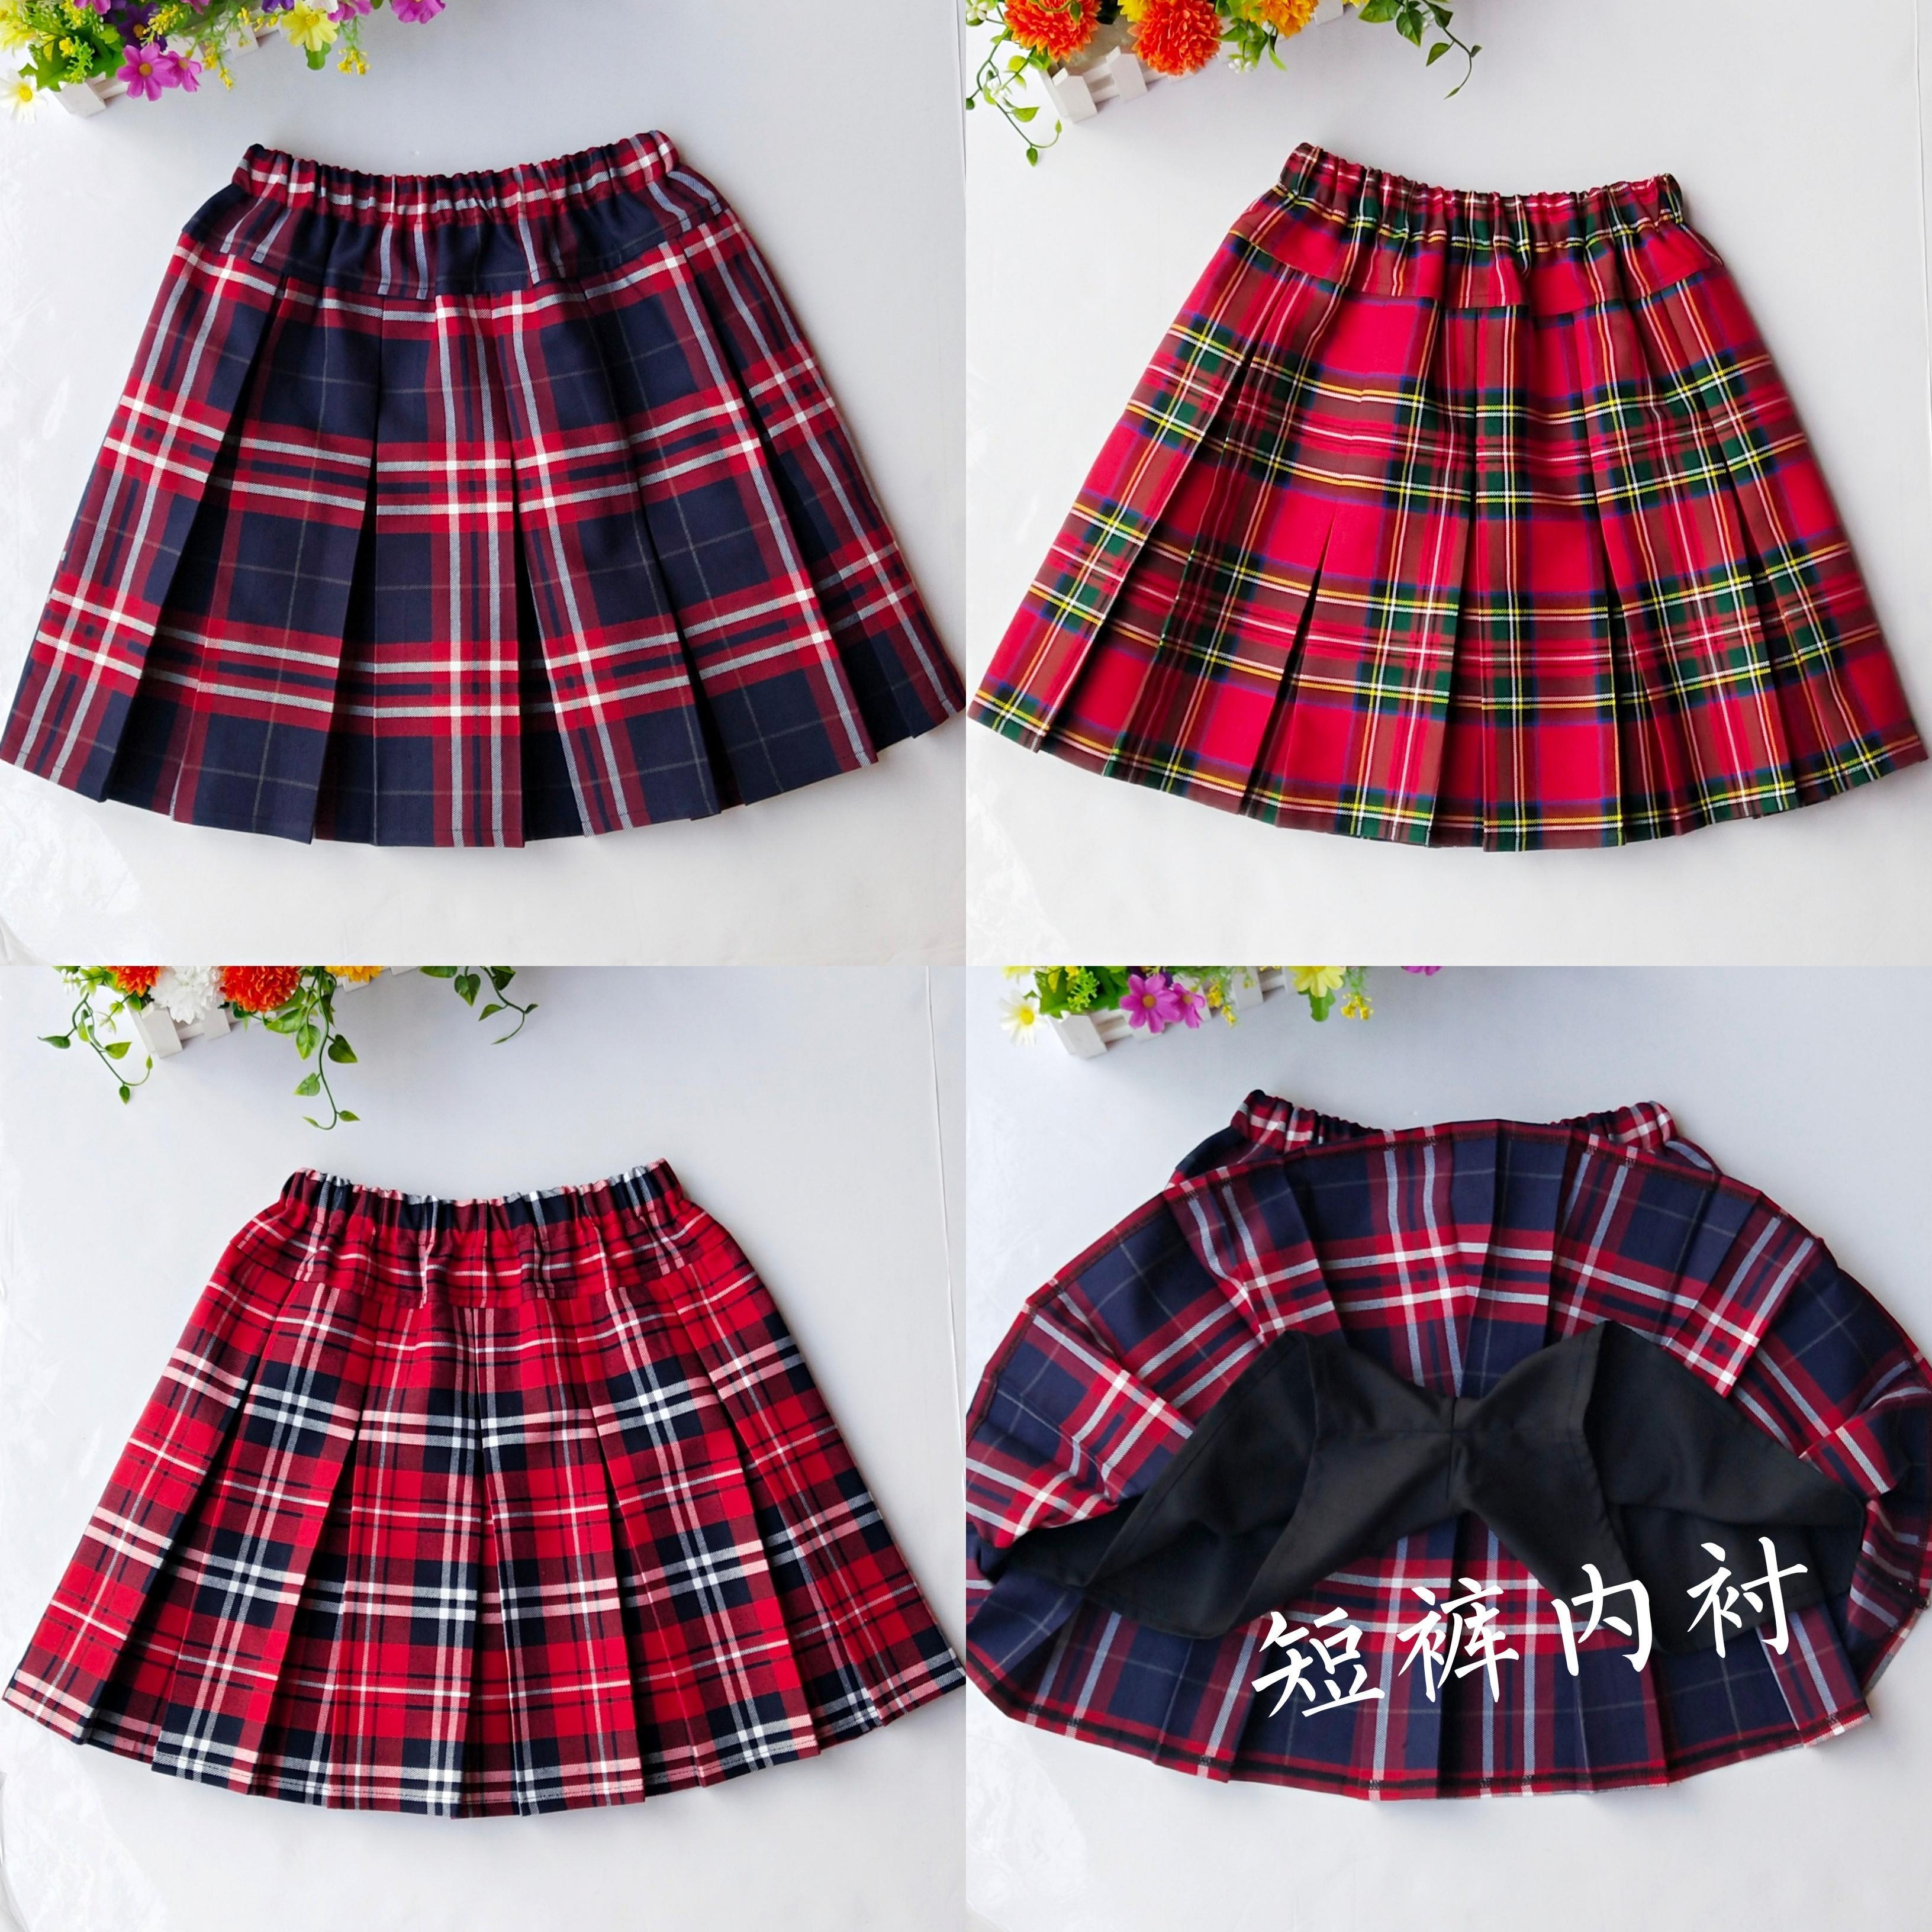 Primary and middle school students school skirt purple red grid skirt skirt girls red white black grid pleated skirt children's costumes